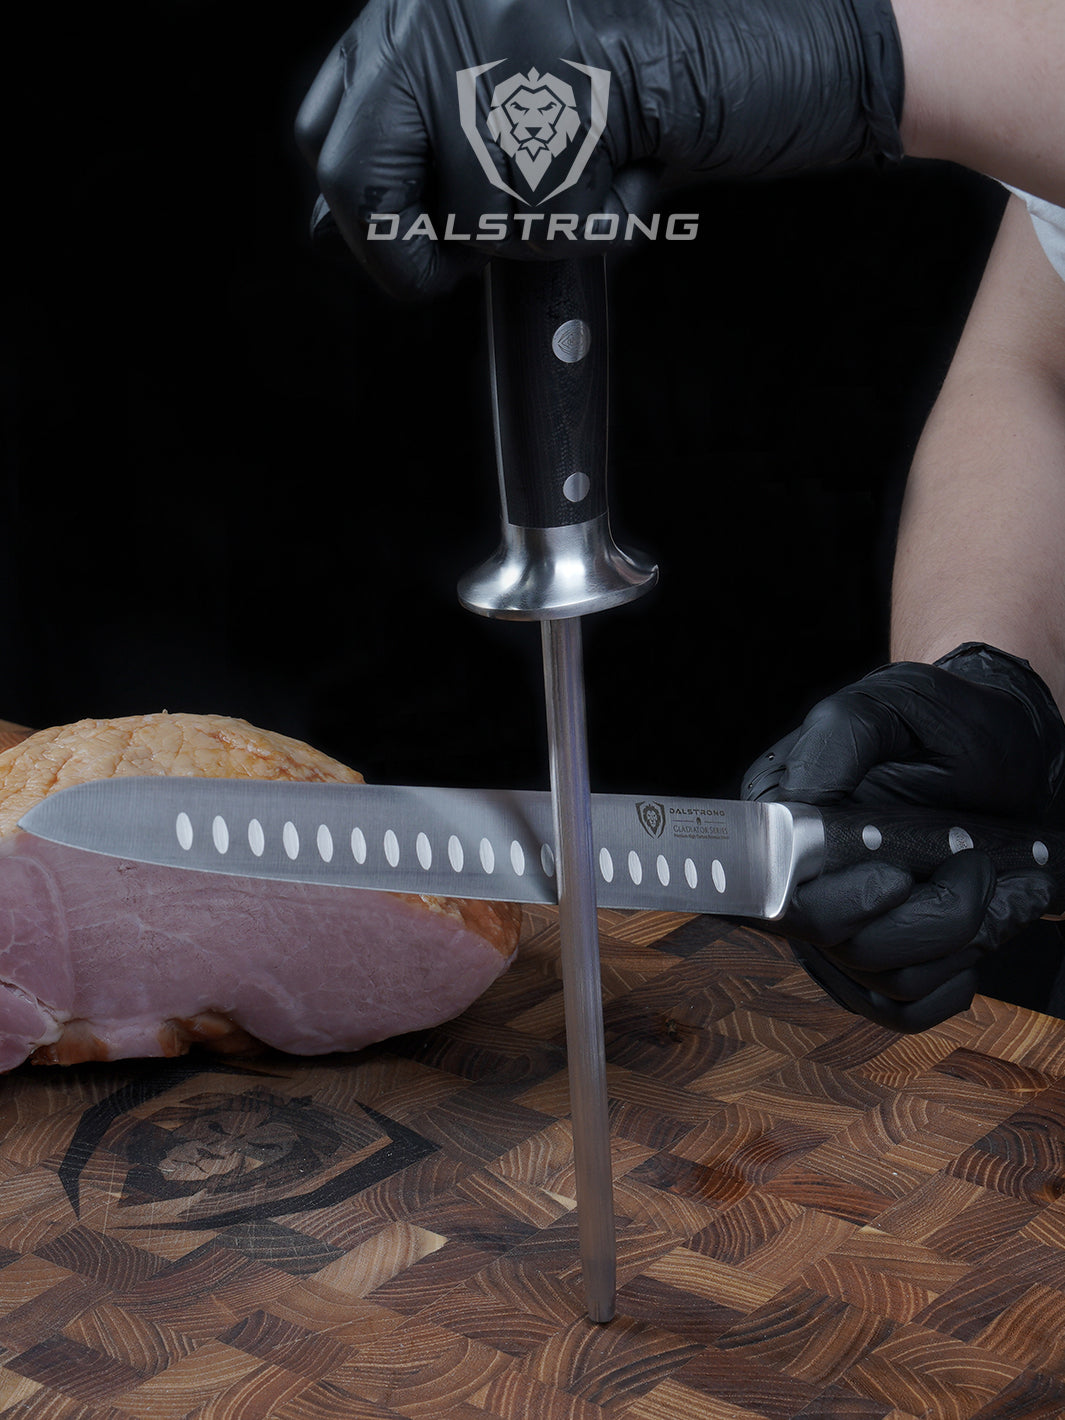 A man's hand with gloves honing the dalstrong gladiator series 9 inch carving knife on top of a dalstrong wooden board.